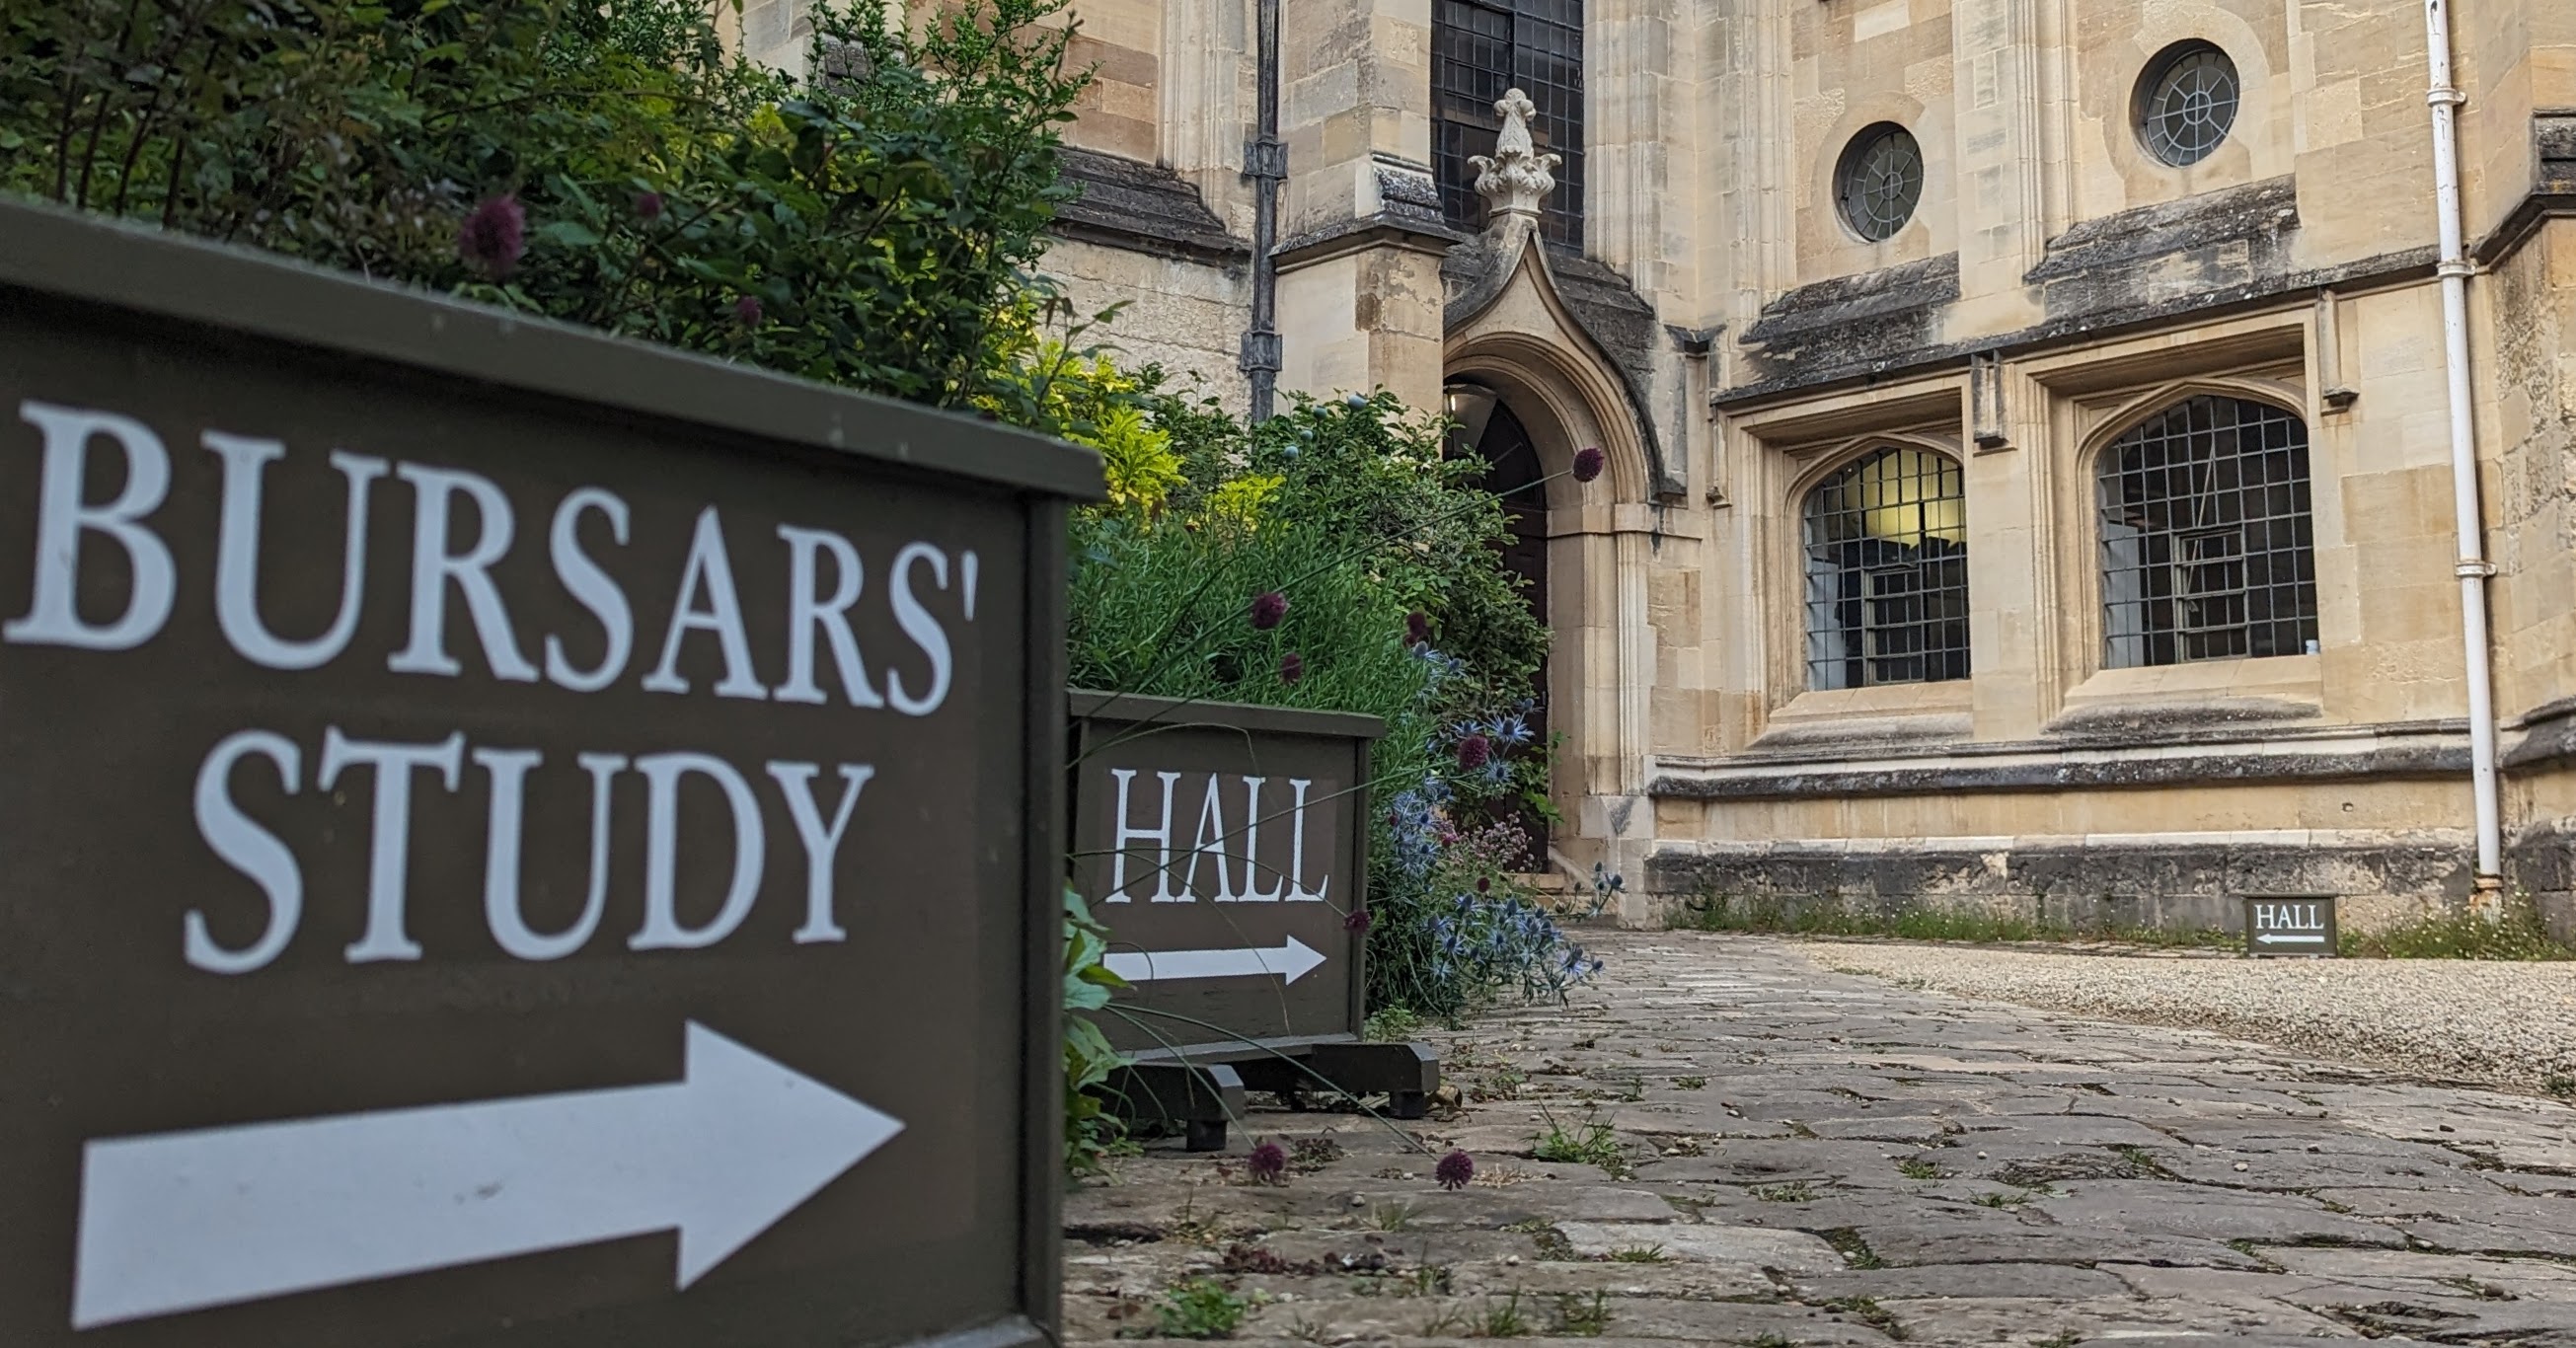 A sign saying Bursars study with an arrow pointing right.  In the background another sign saying Hall and part of the College buildings